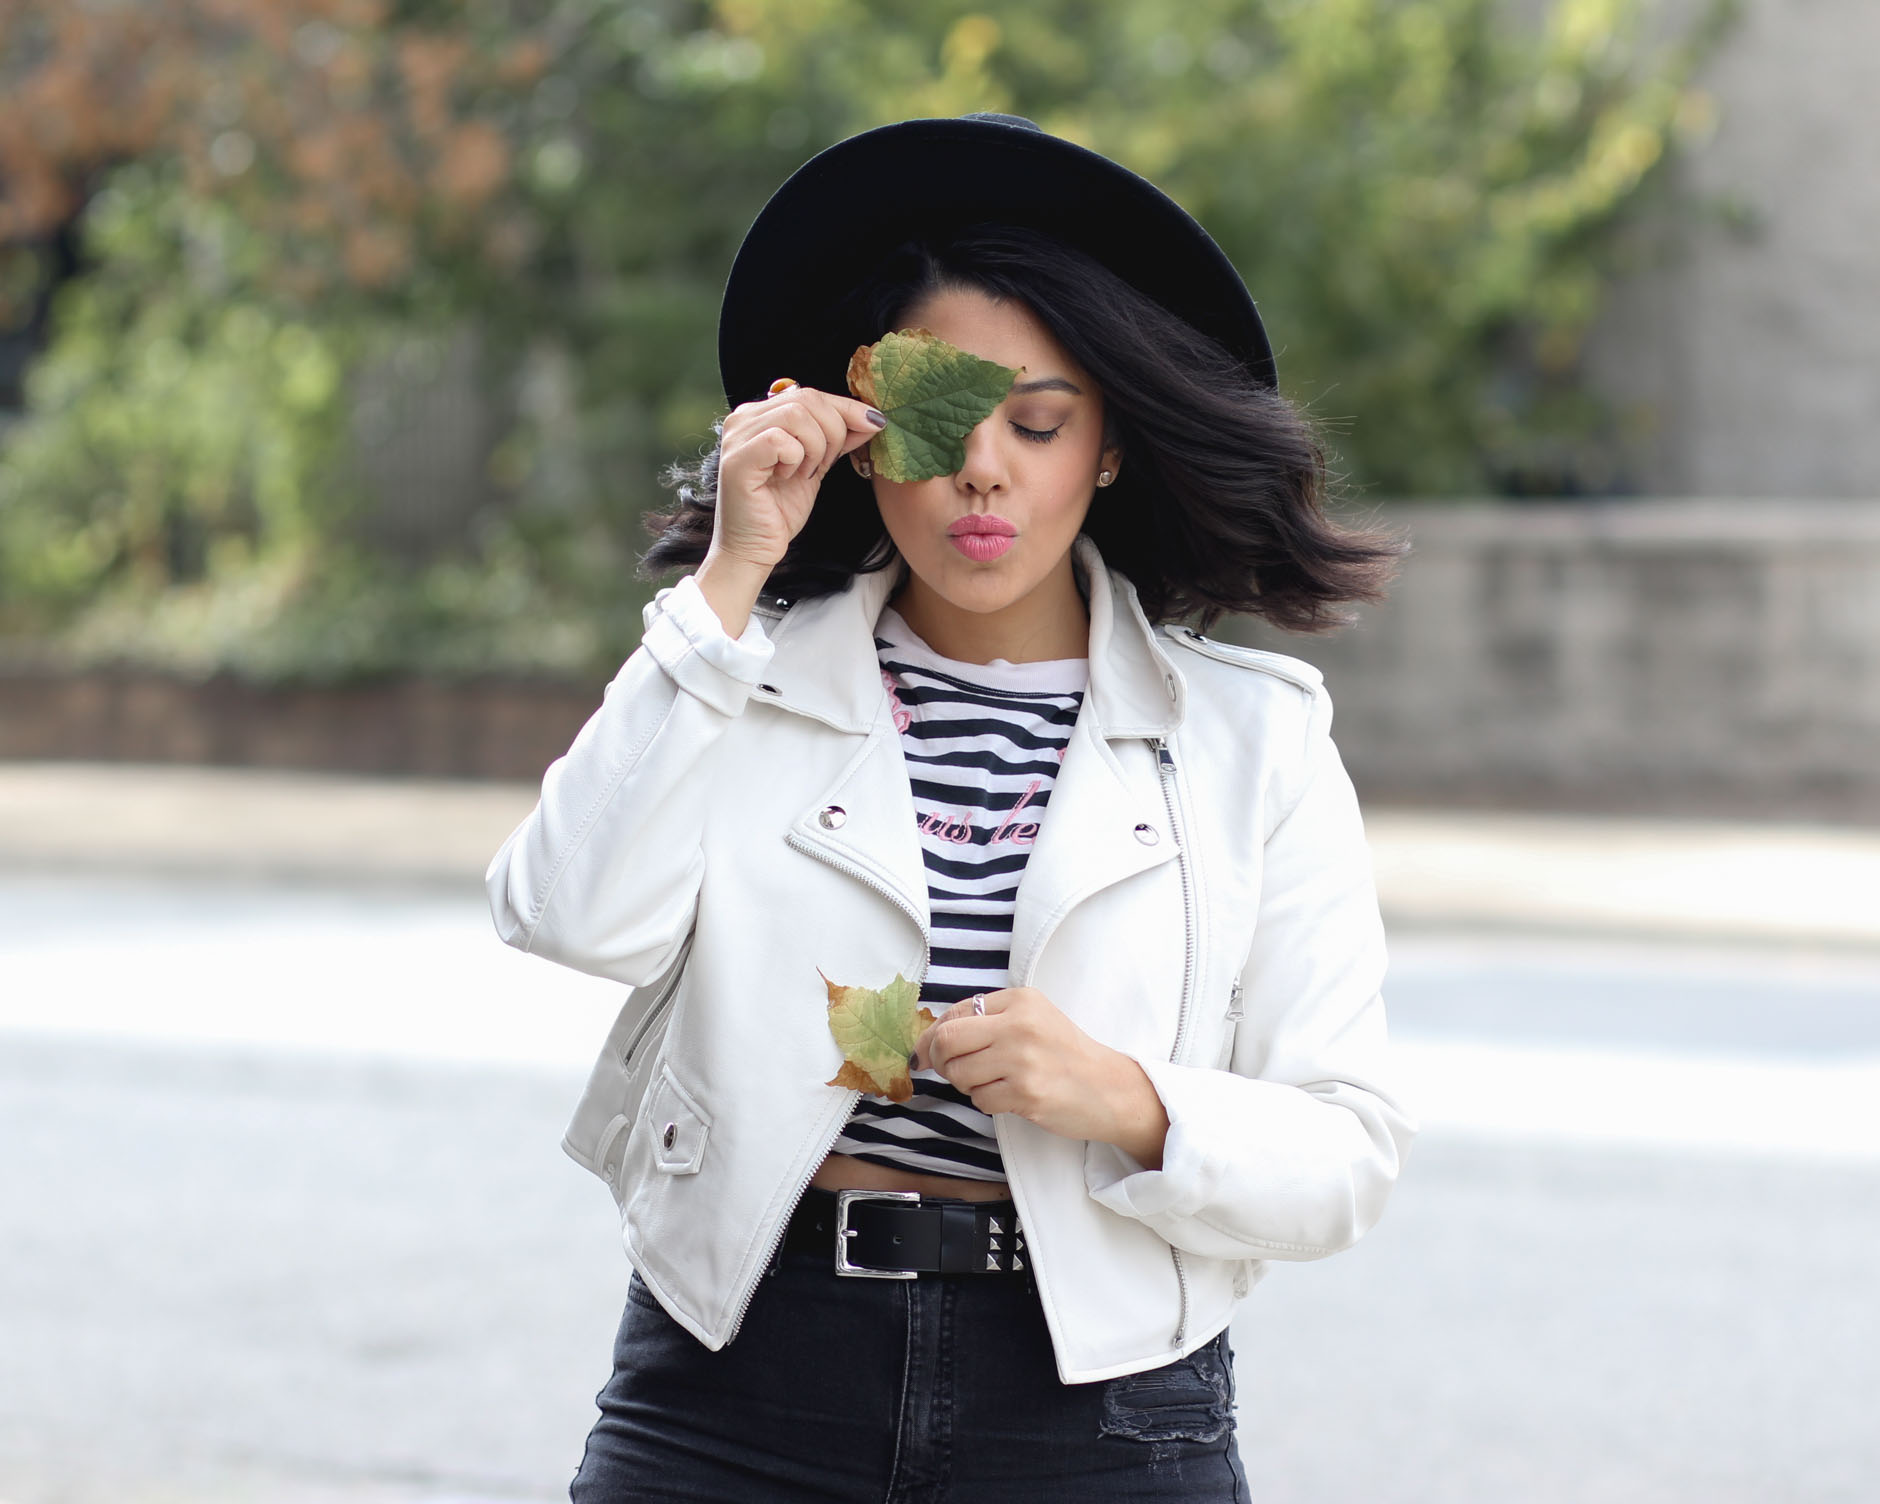 lifestyle blogger naty michele wearing a faux leather jacket and holding up a leaf